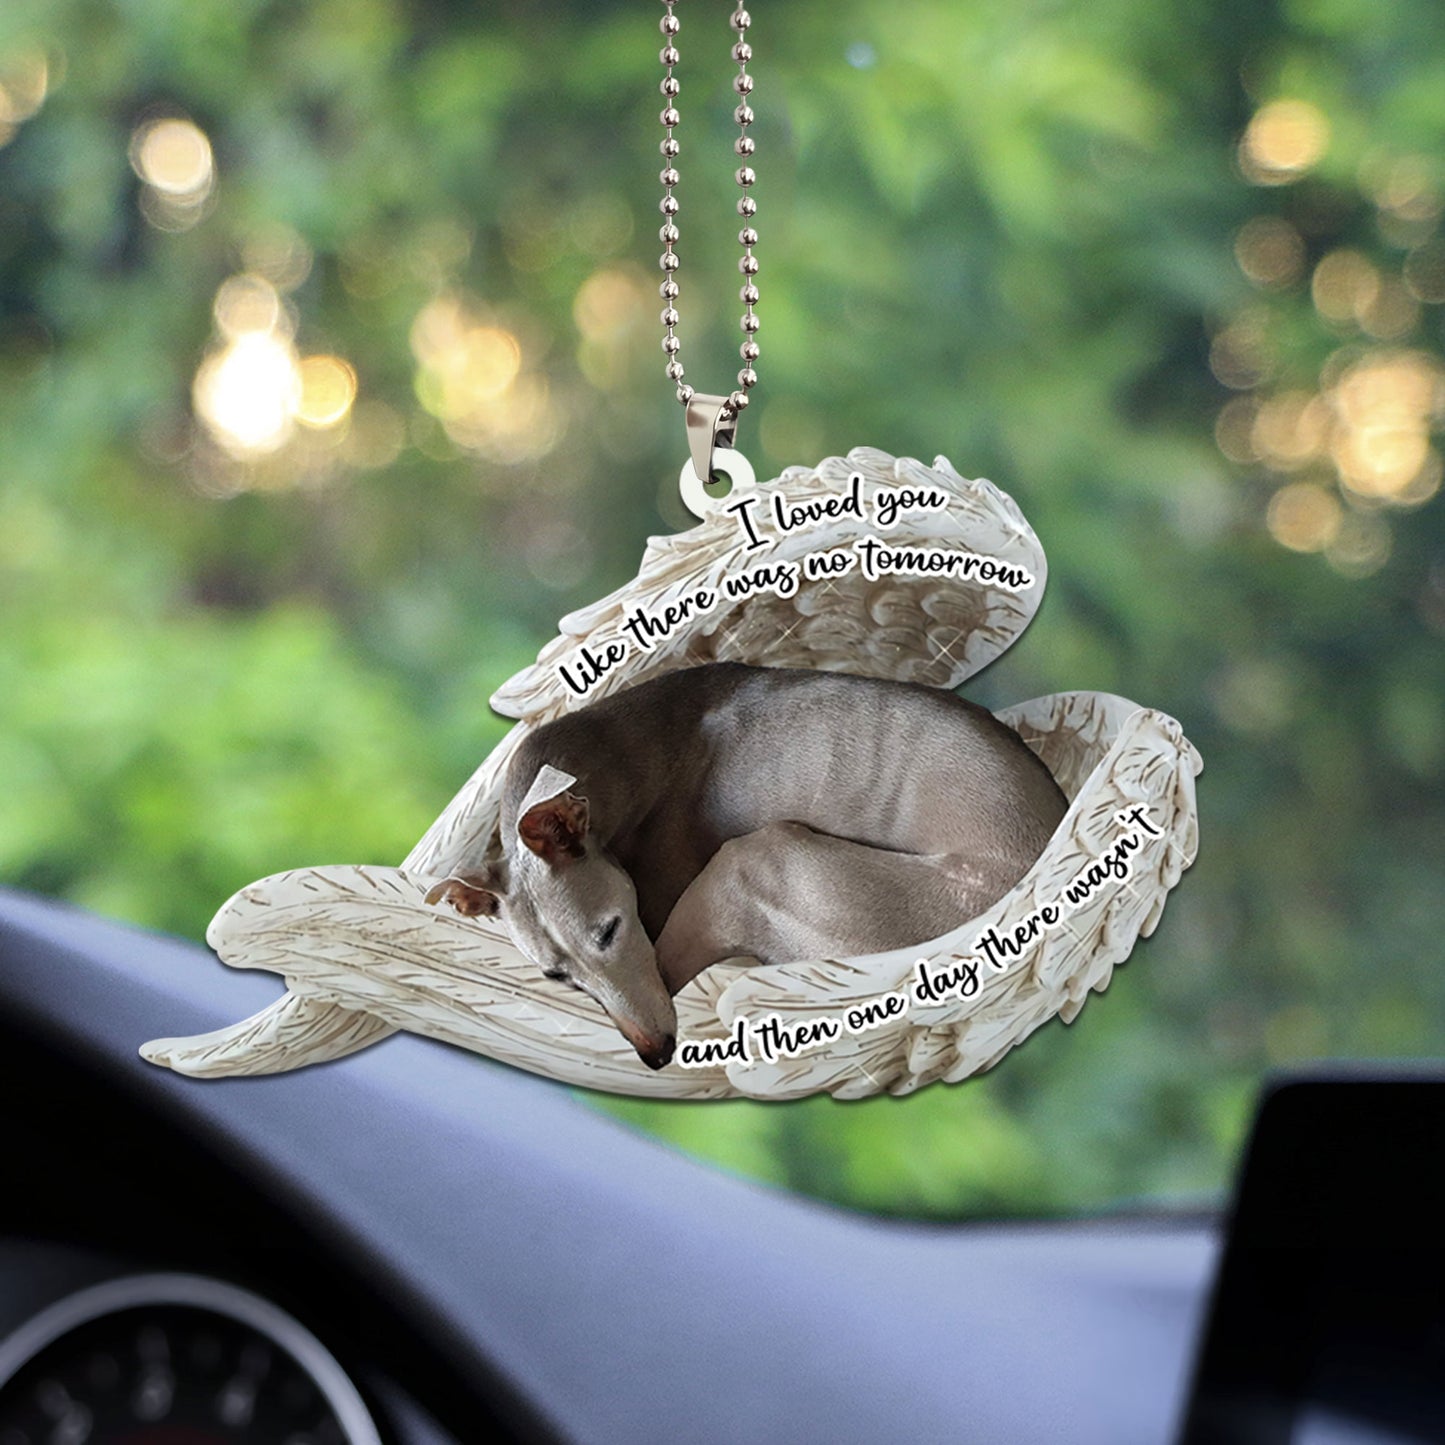 Whippet Sleeping Angel Dog Personalizedwitch Flat Car Memorial Ornament